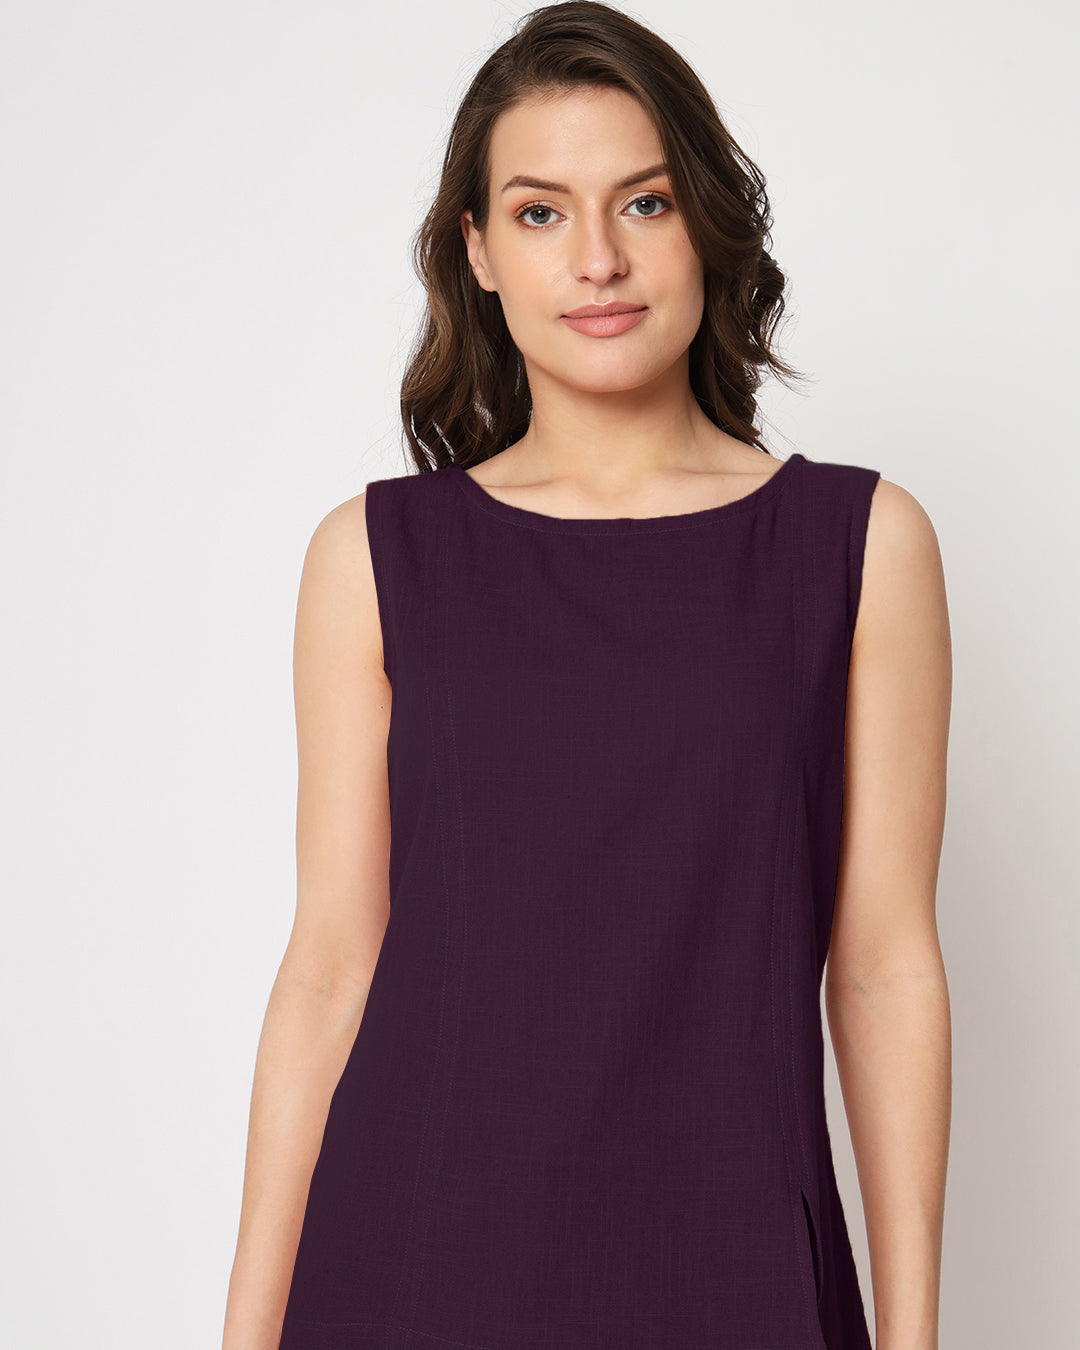 Plum Passion Sleeveless Short Length Solid Co-ord Set